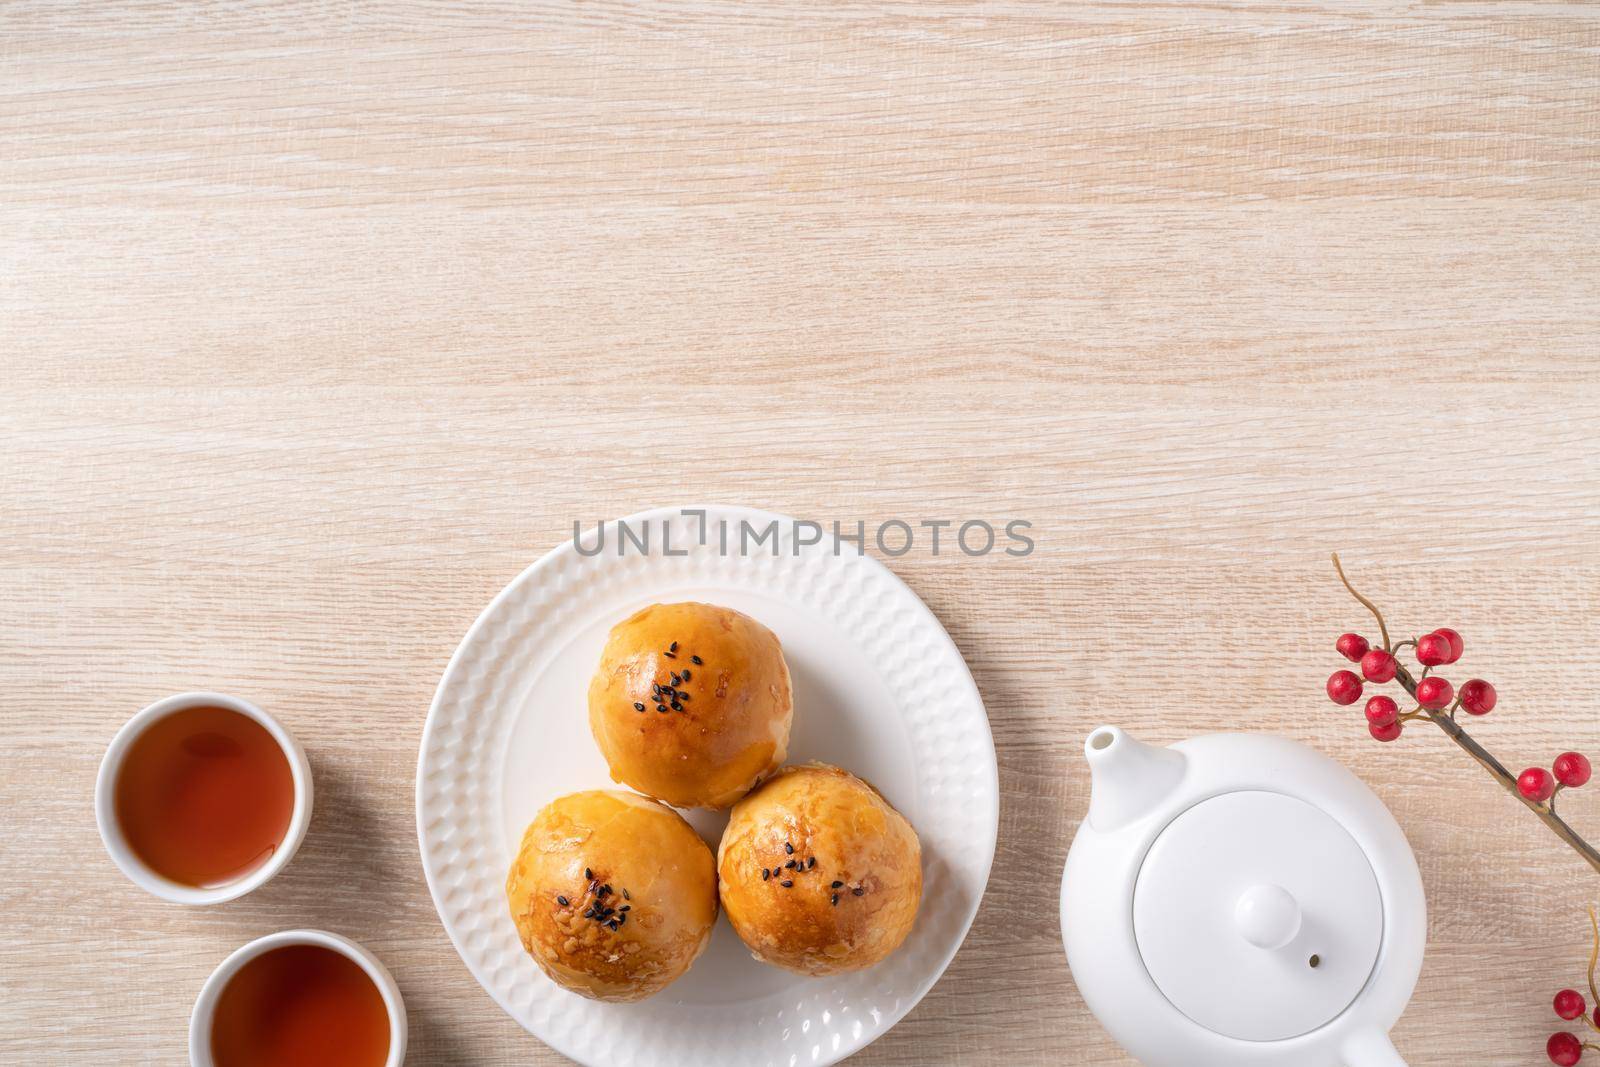 Top view design concept of Moon cake yolk pastry, mooncake for Mid-Autumn Festival holiday on wooden table background